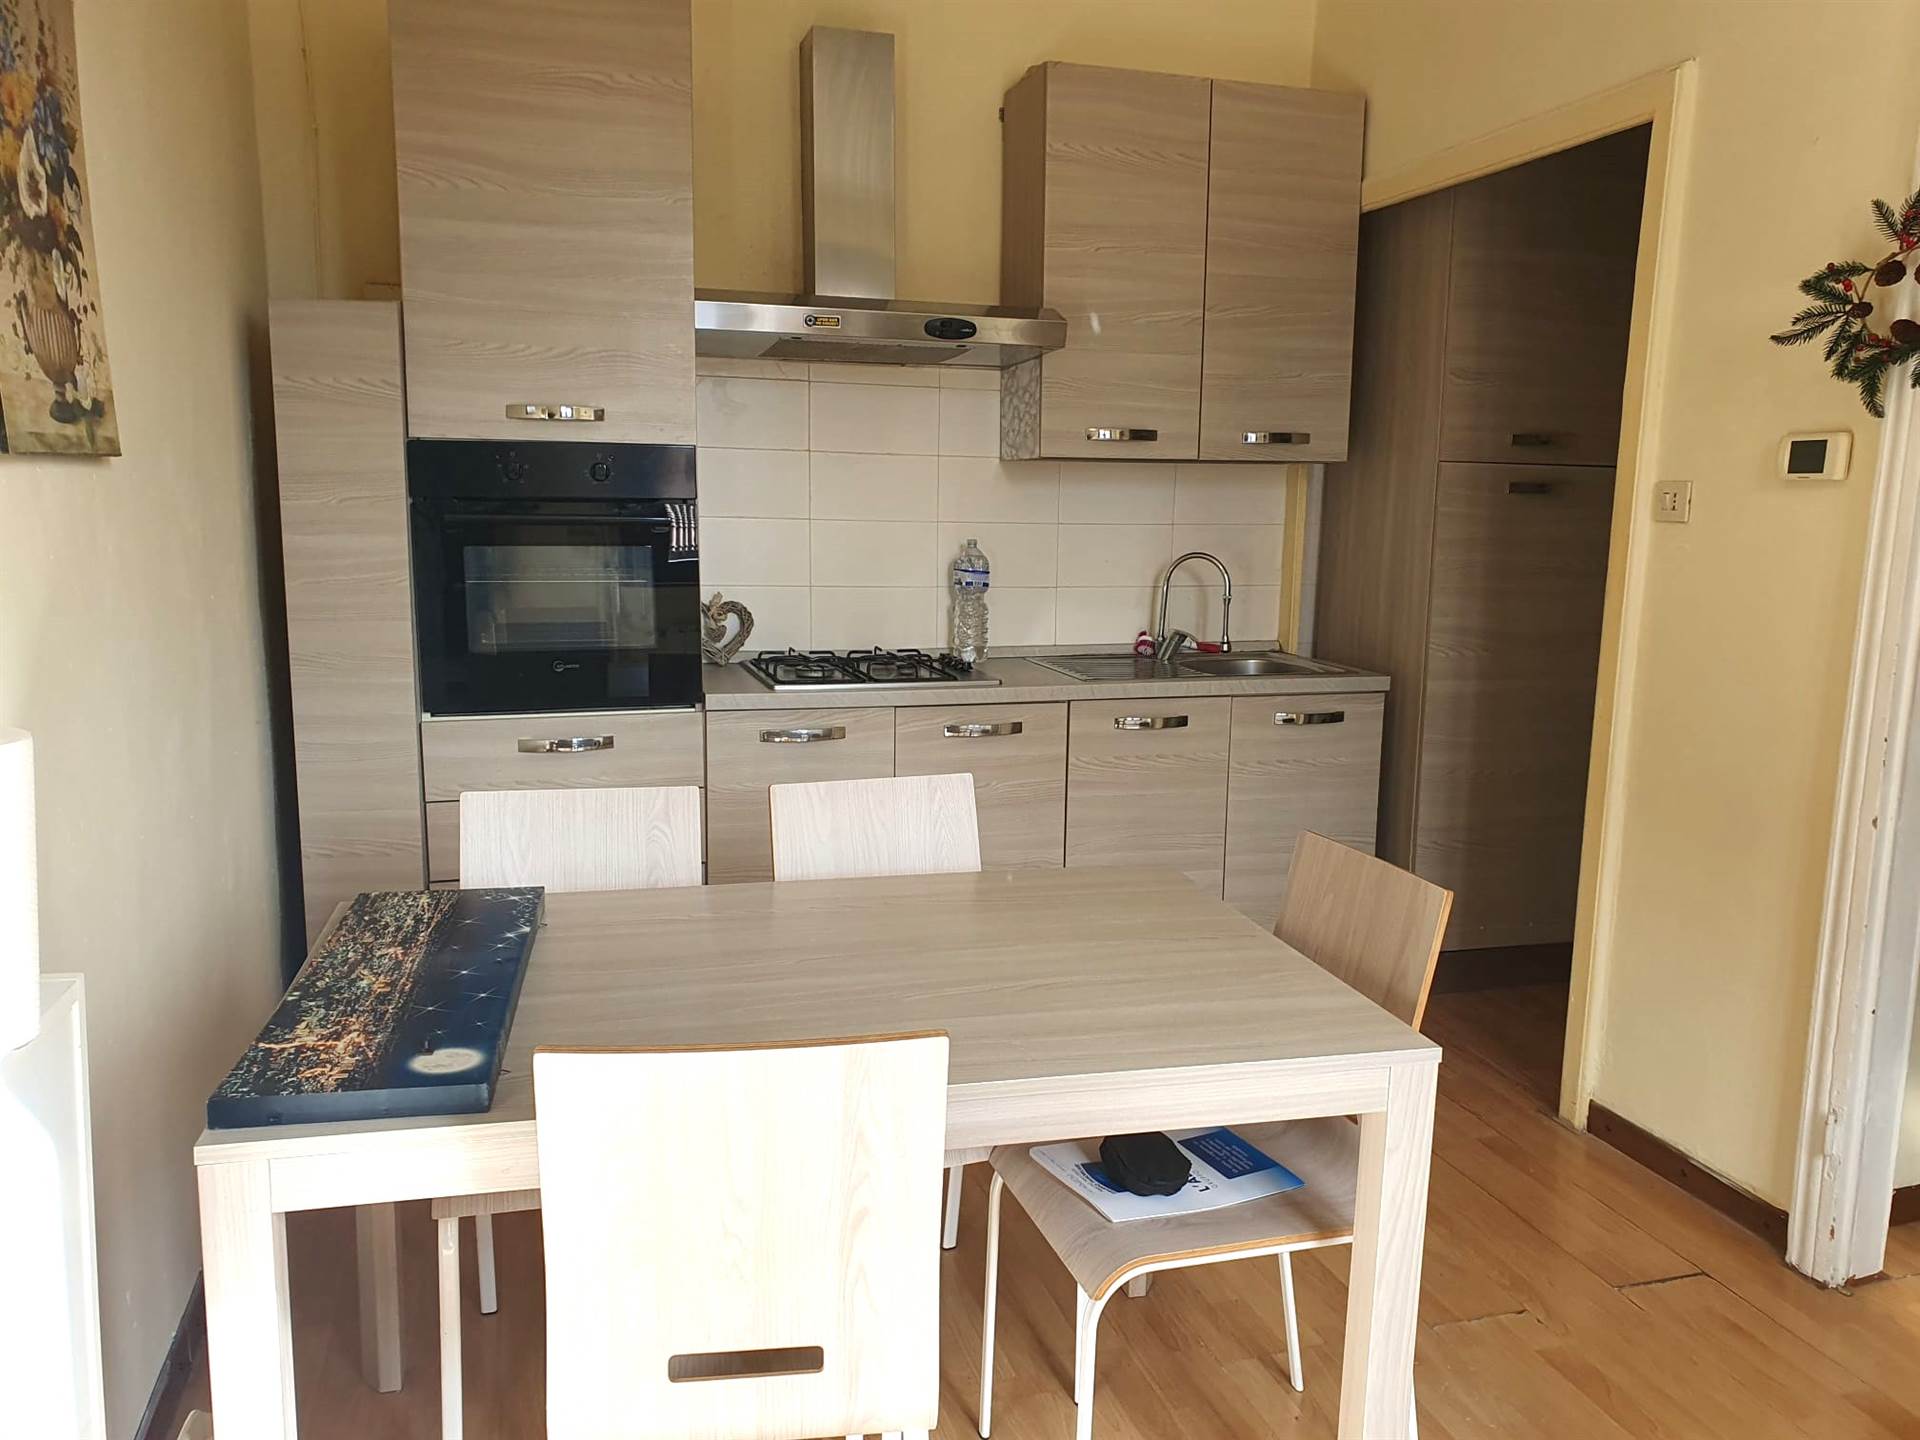 SESTO SAN GIOVANNI, Apartment for sale of 65 Sq. mt., Good condition, Heating Individual heating system, Energetic class: G, Epi: 175 kwh/m2 year, 